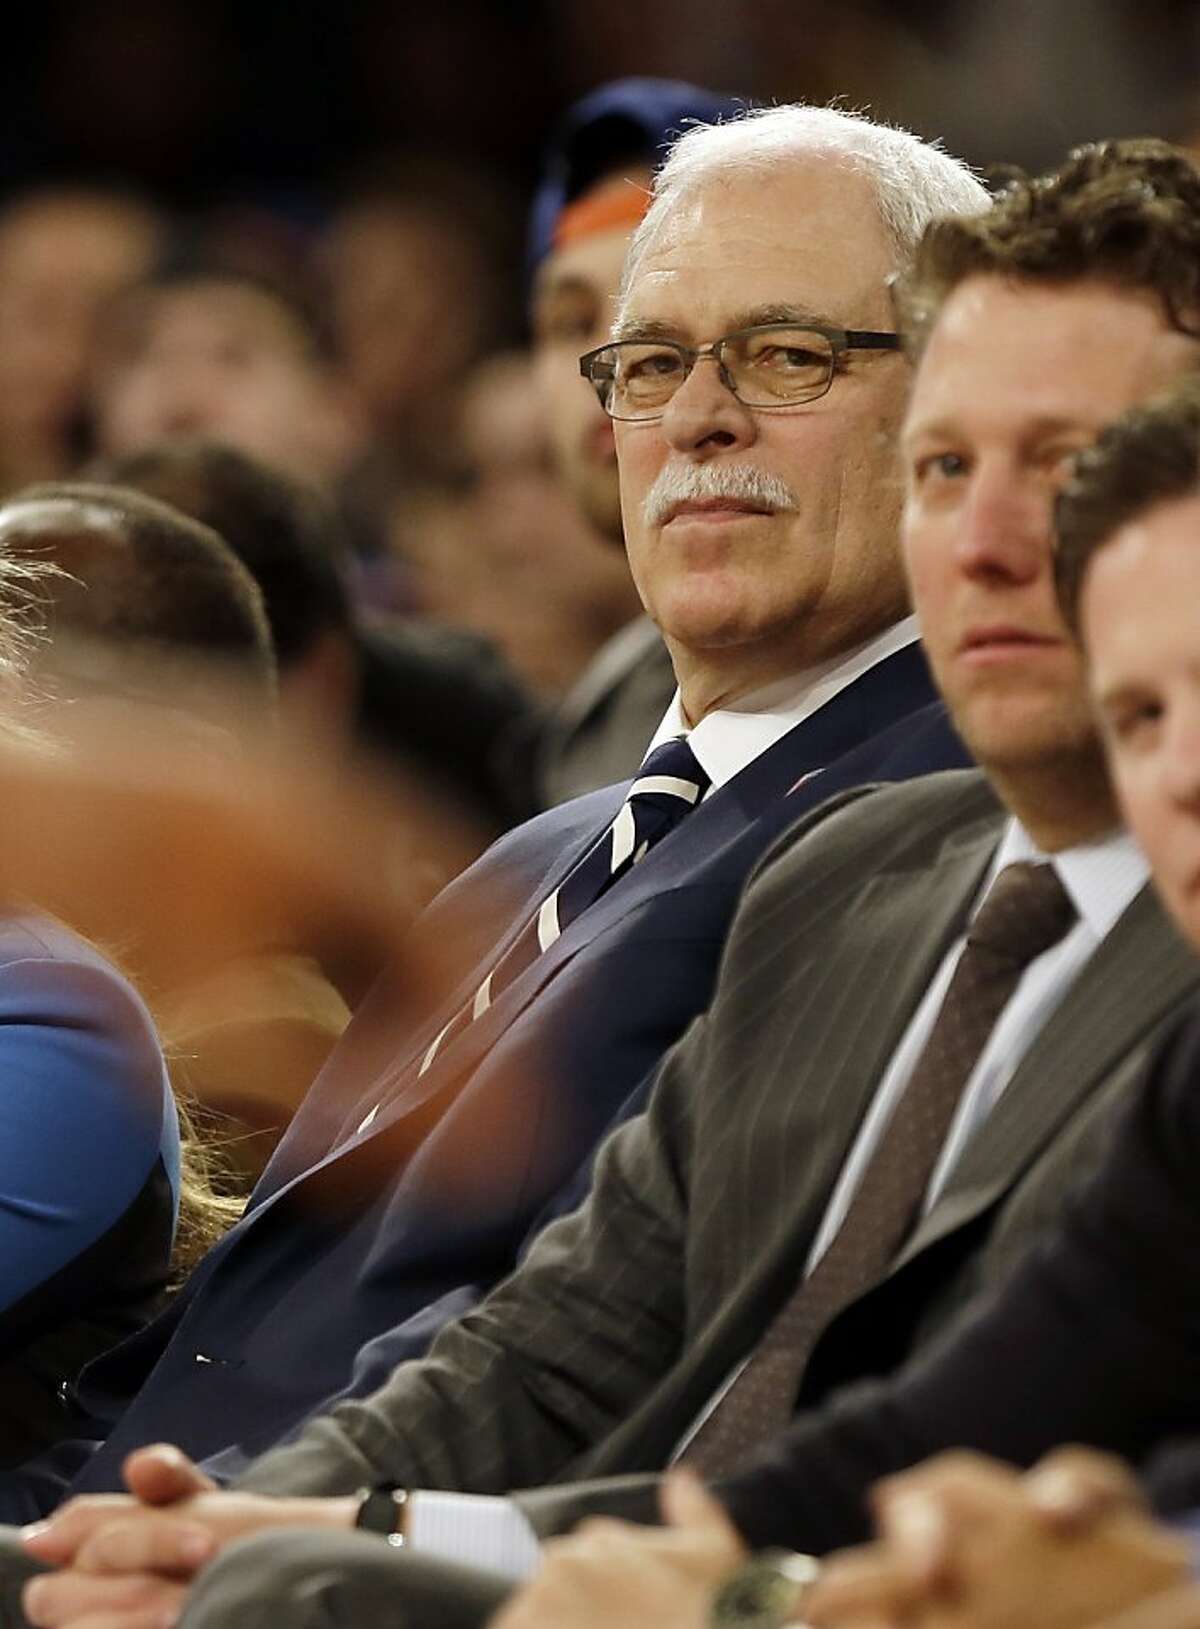 Former NBA coach Phil Jackson watches the first half of a basketball game between the New York Knicks and the Milwaukee Bucks, Friday, April 5, 2013, in New York. (AP Photo/Frank Franklin II)